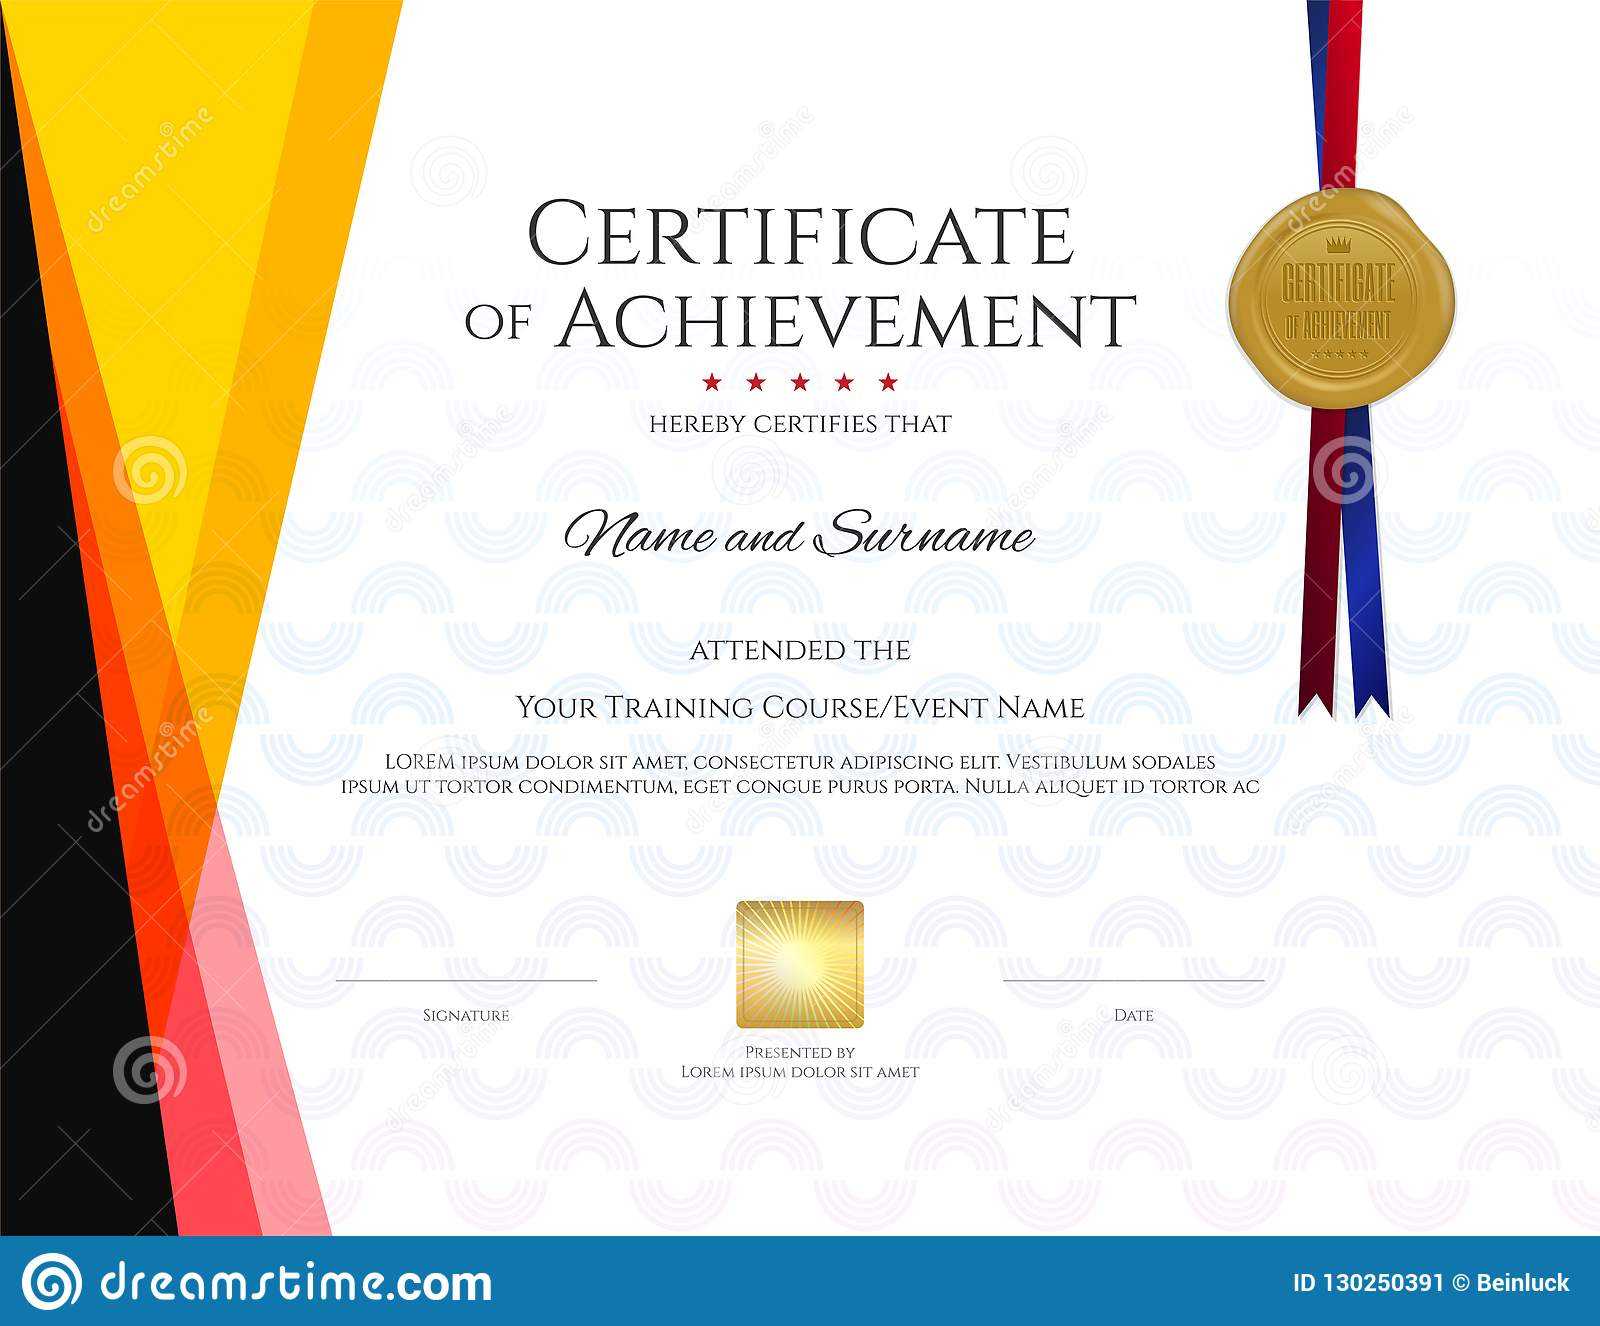 Modern Certificate Template With Elegant Border Frame Throughout Christian Certificate Template